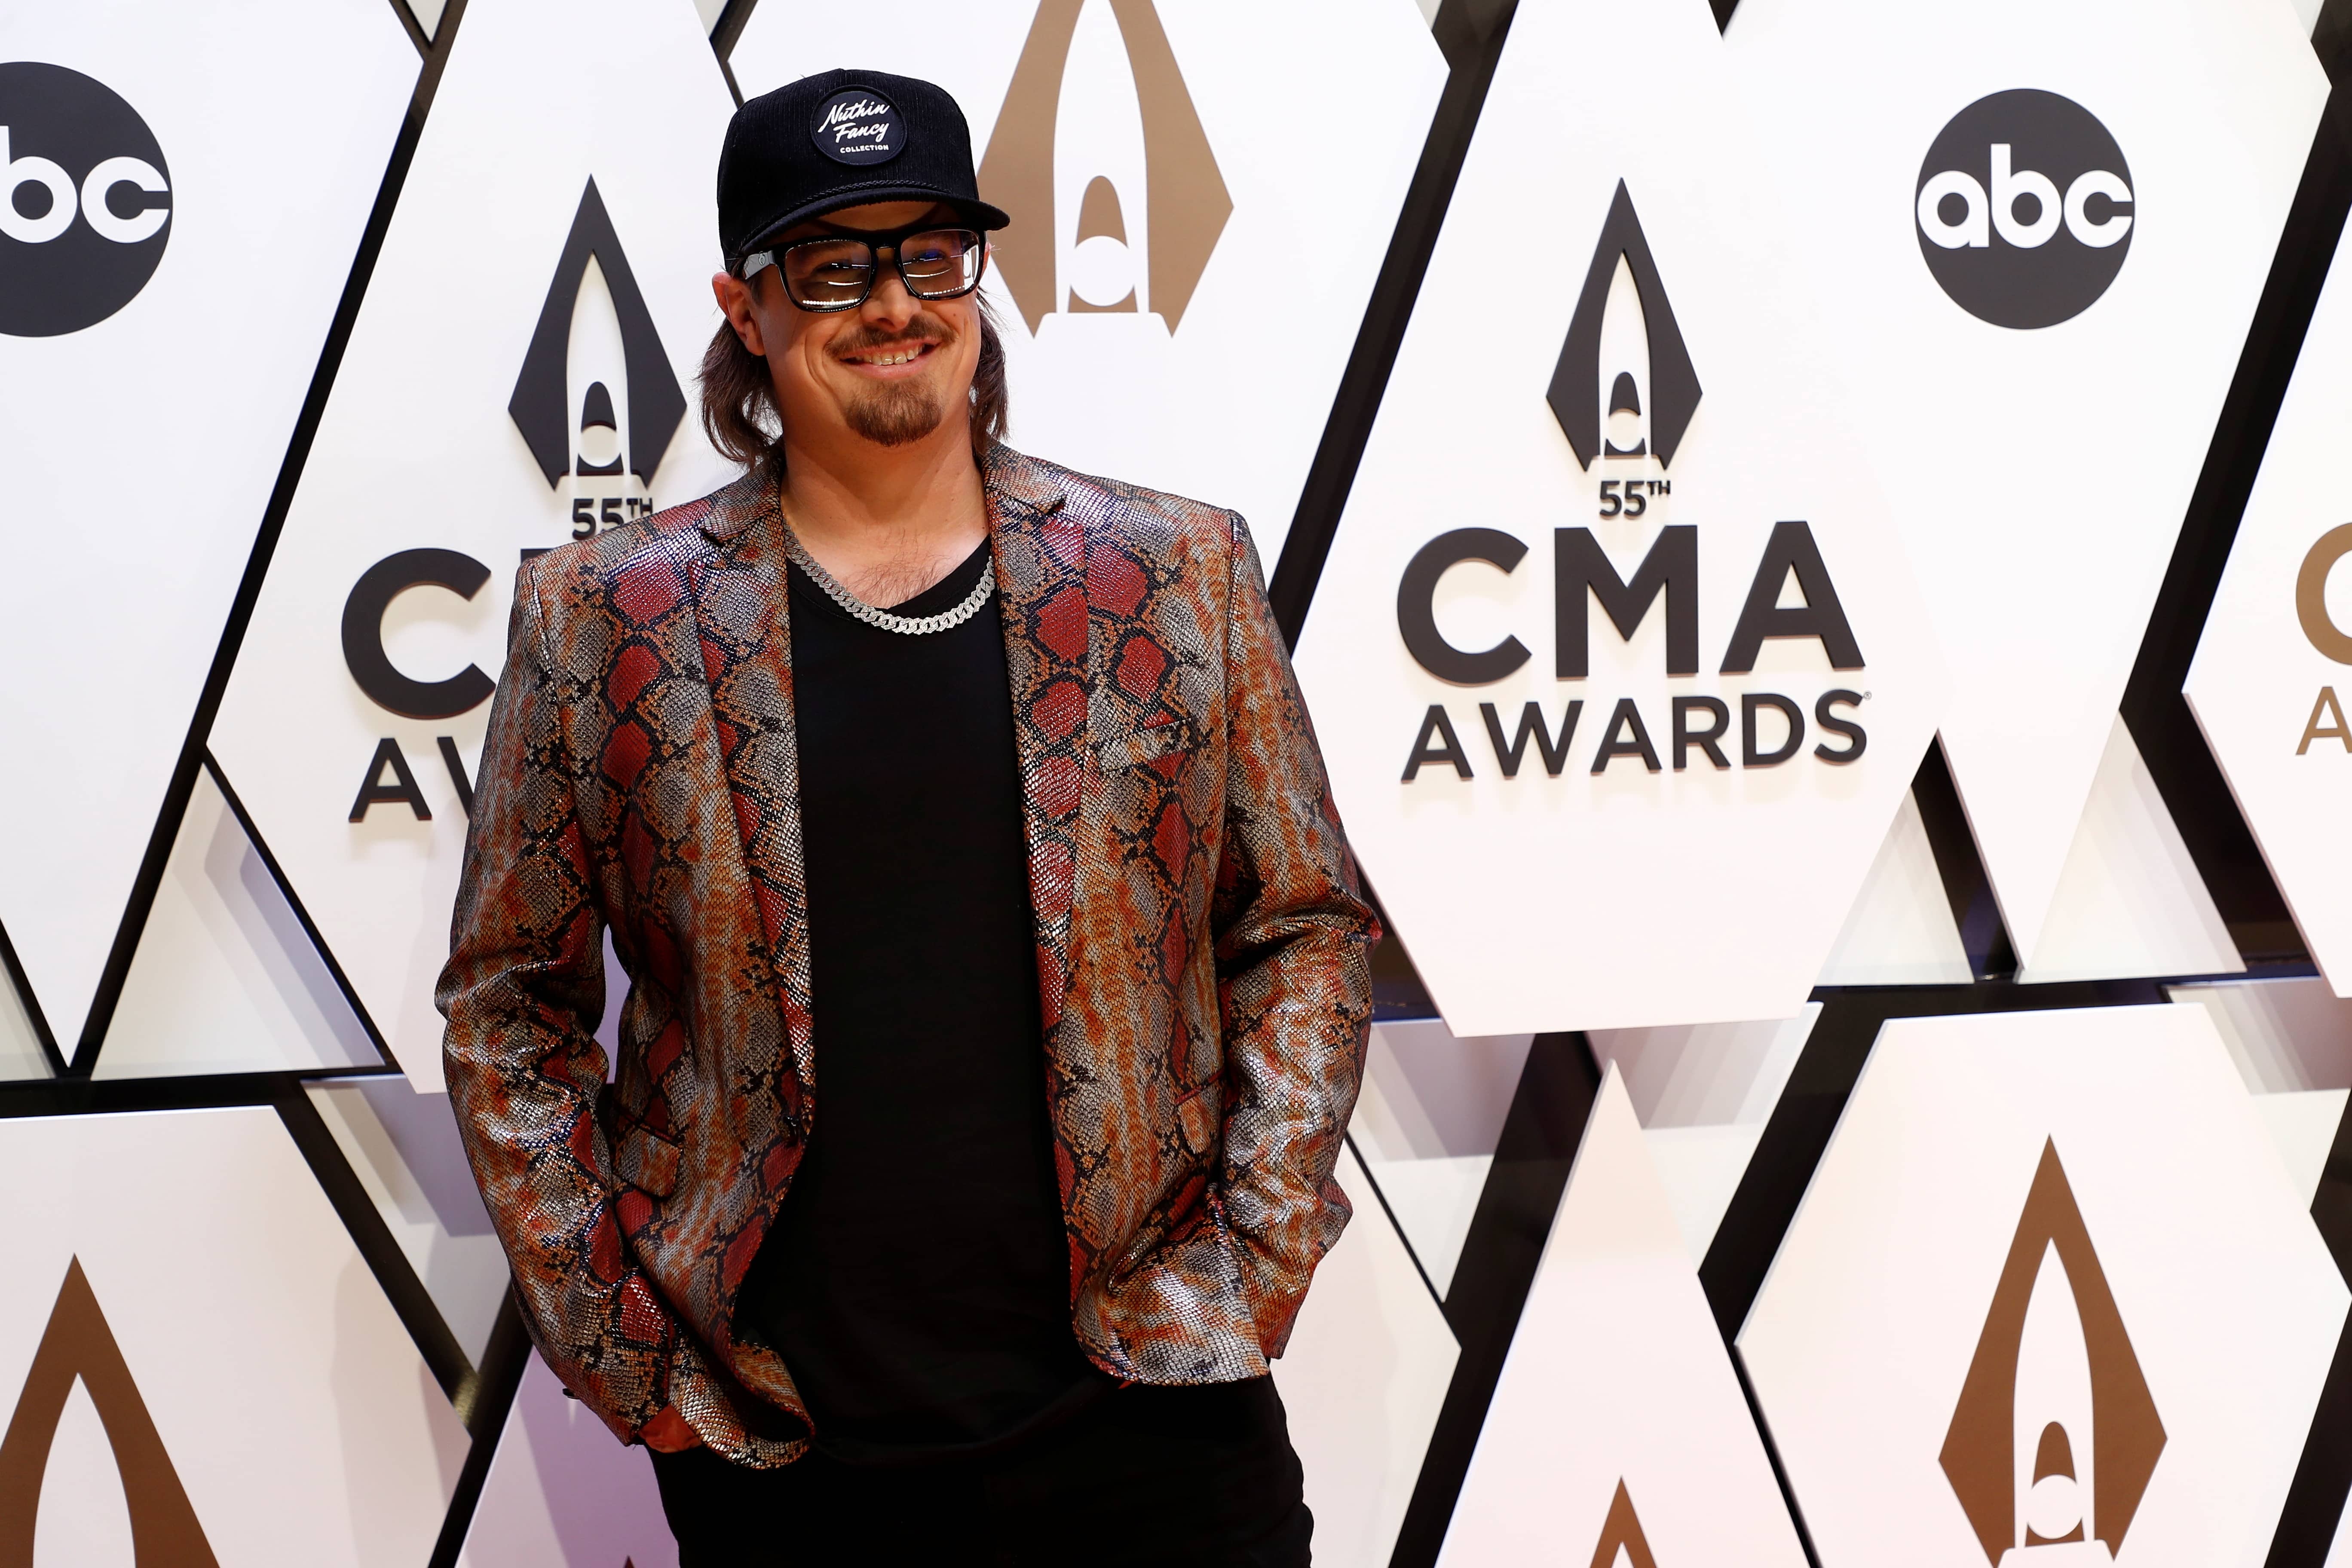 55th-annual-country-music-association-cma-awards-in-nashville